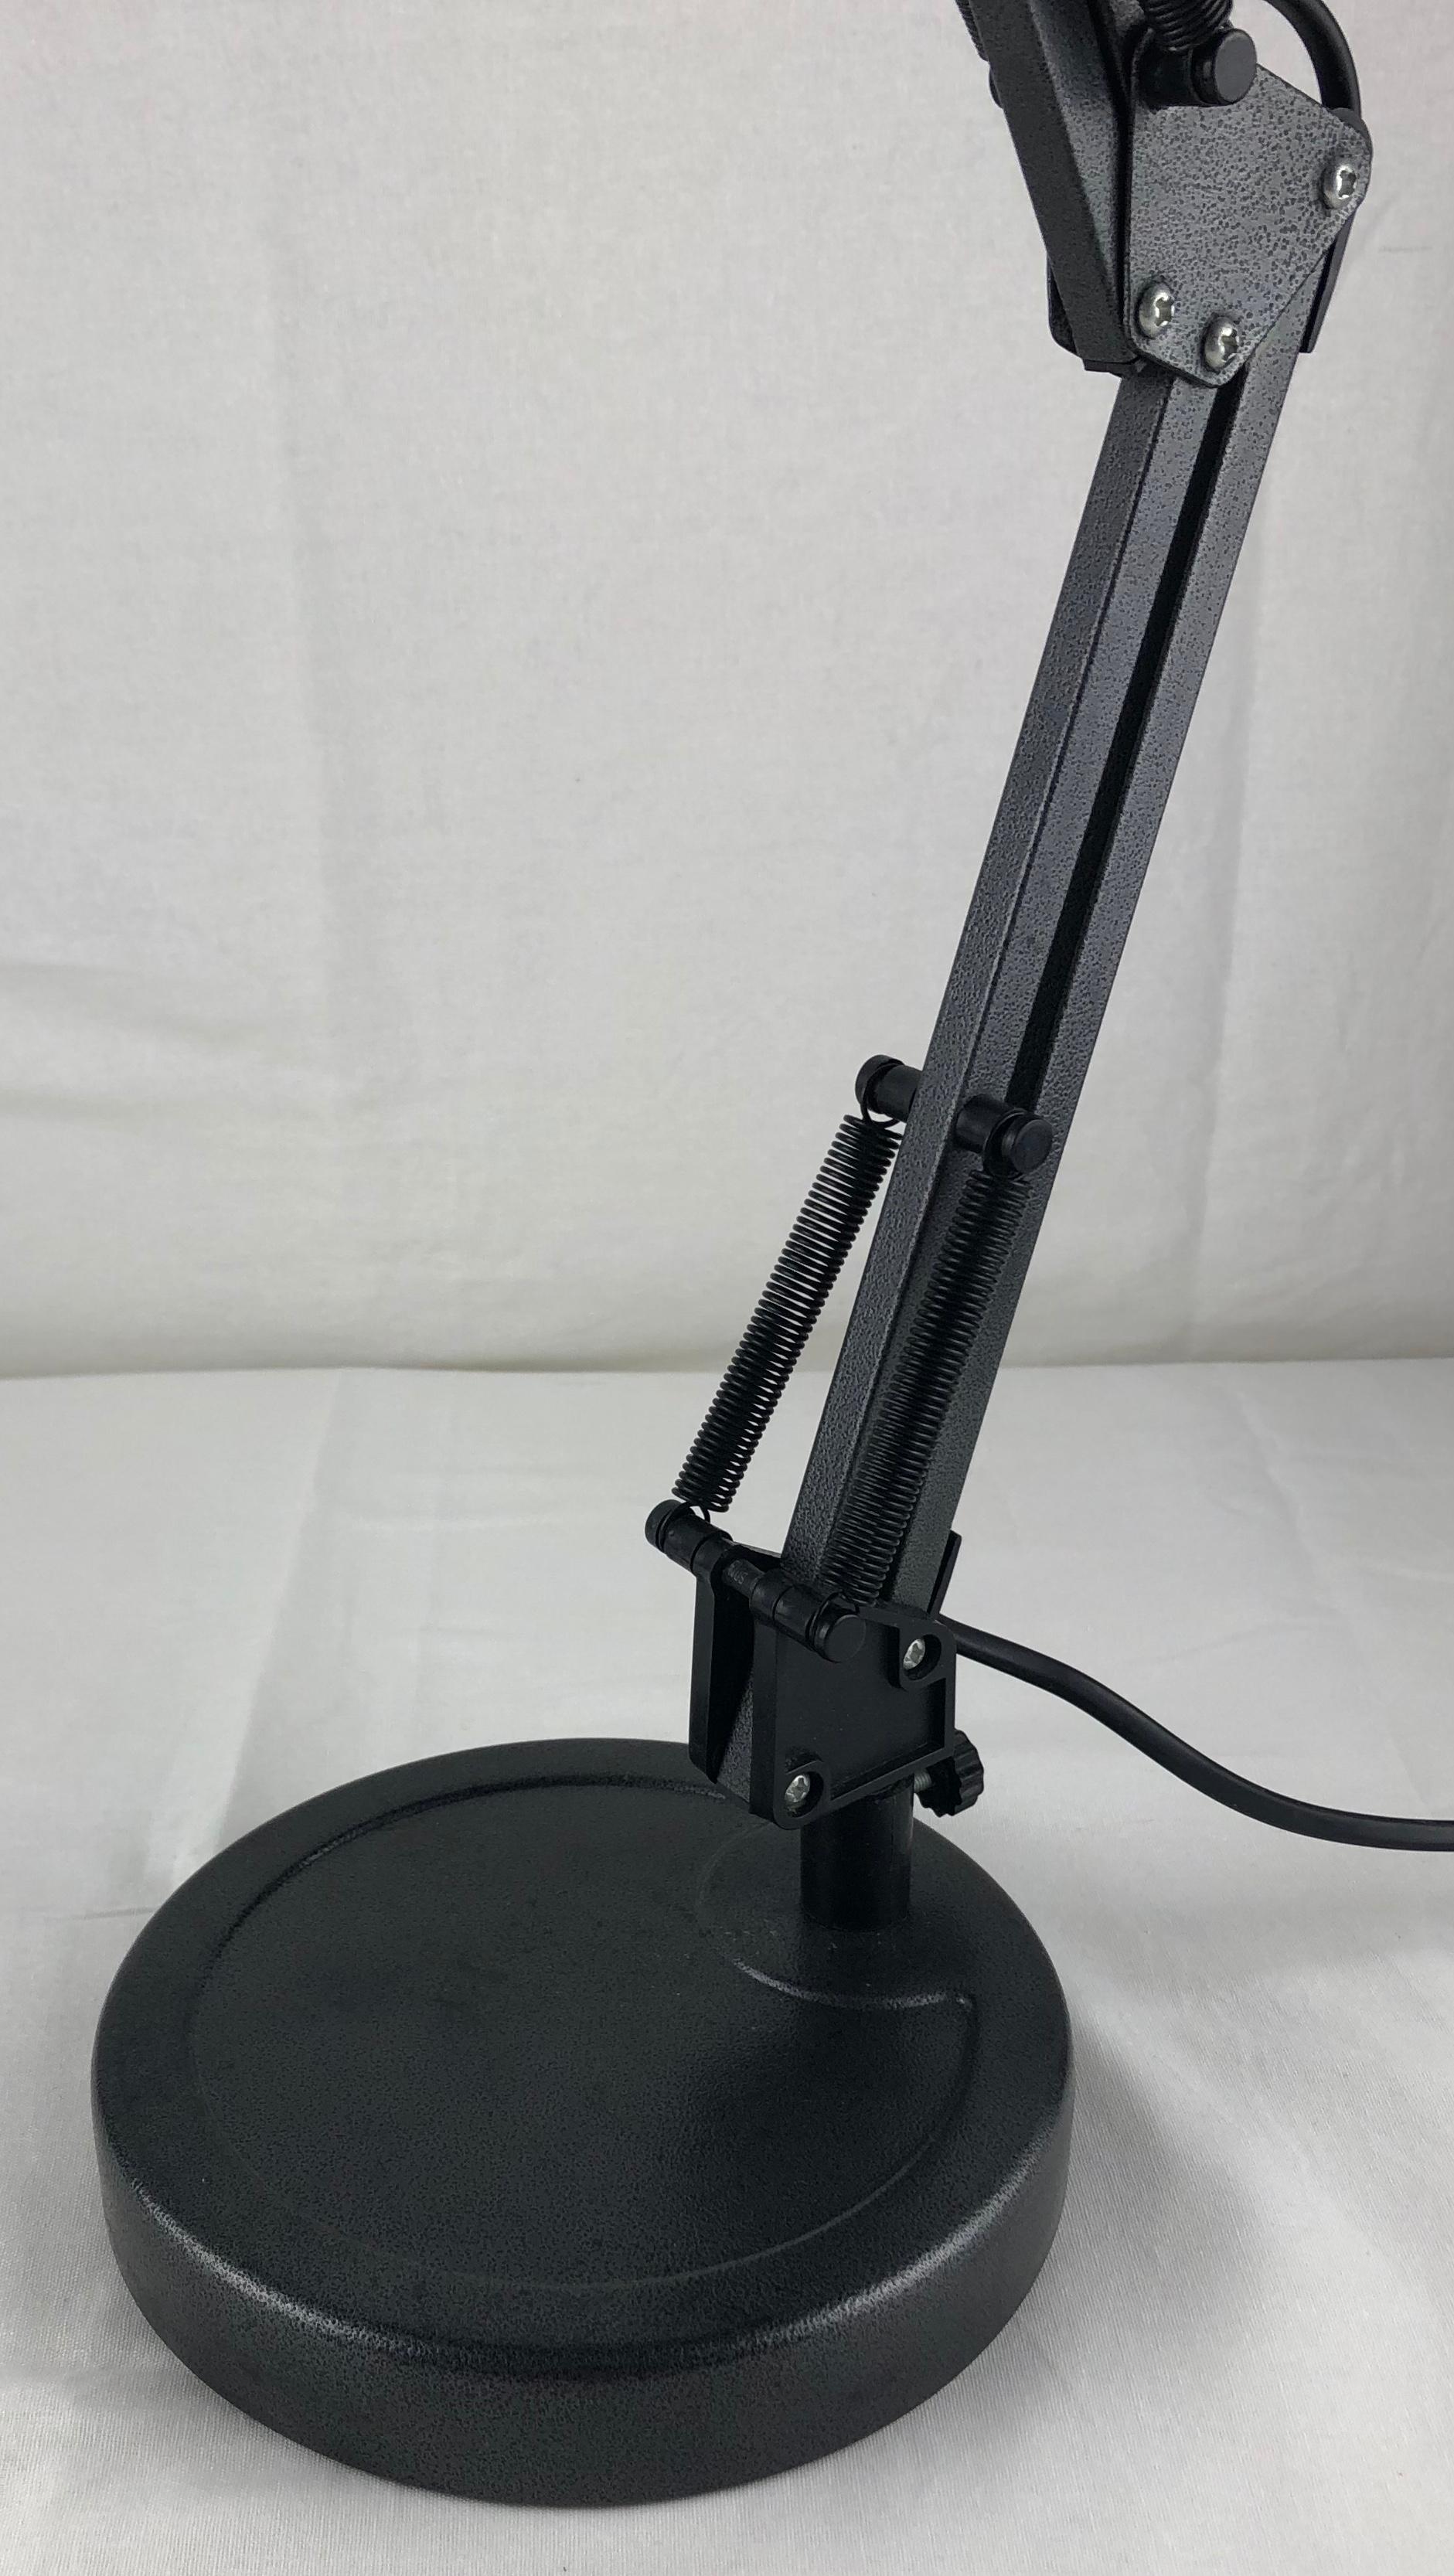 Handsome articulating desk or table lamp in painted aluminum, dark grey.

Vintage French industrial steel articulated table lamp. Lamps like these were originally used as task lamps in factories, but are perfect now as bedside lamps or on side